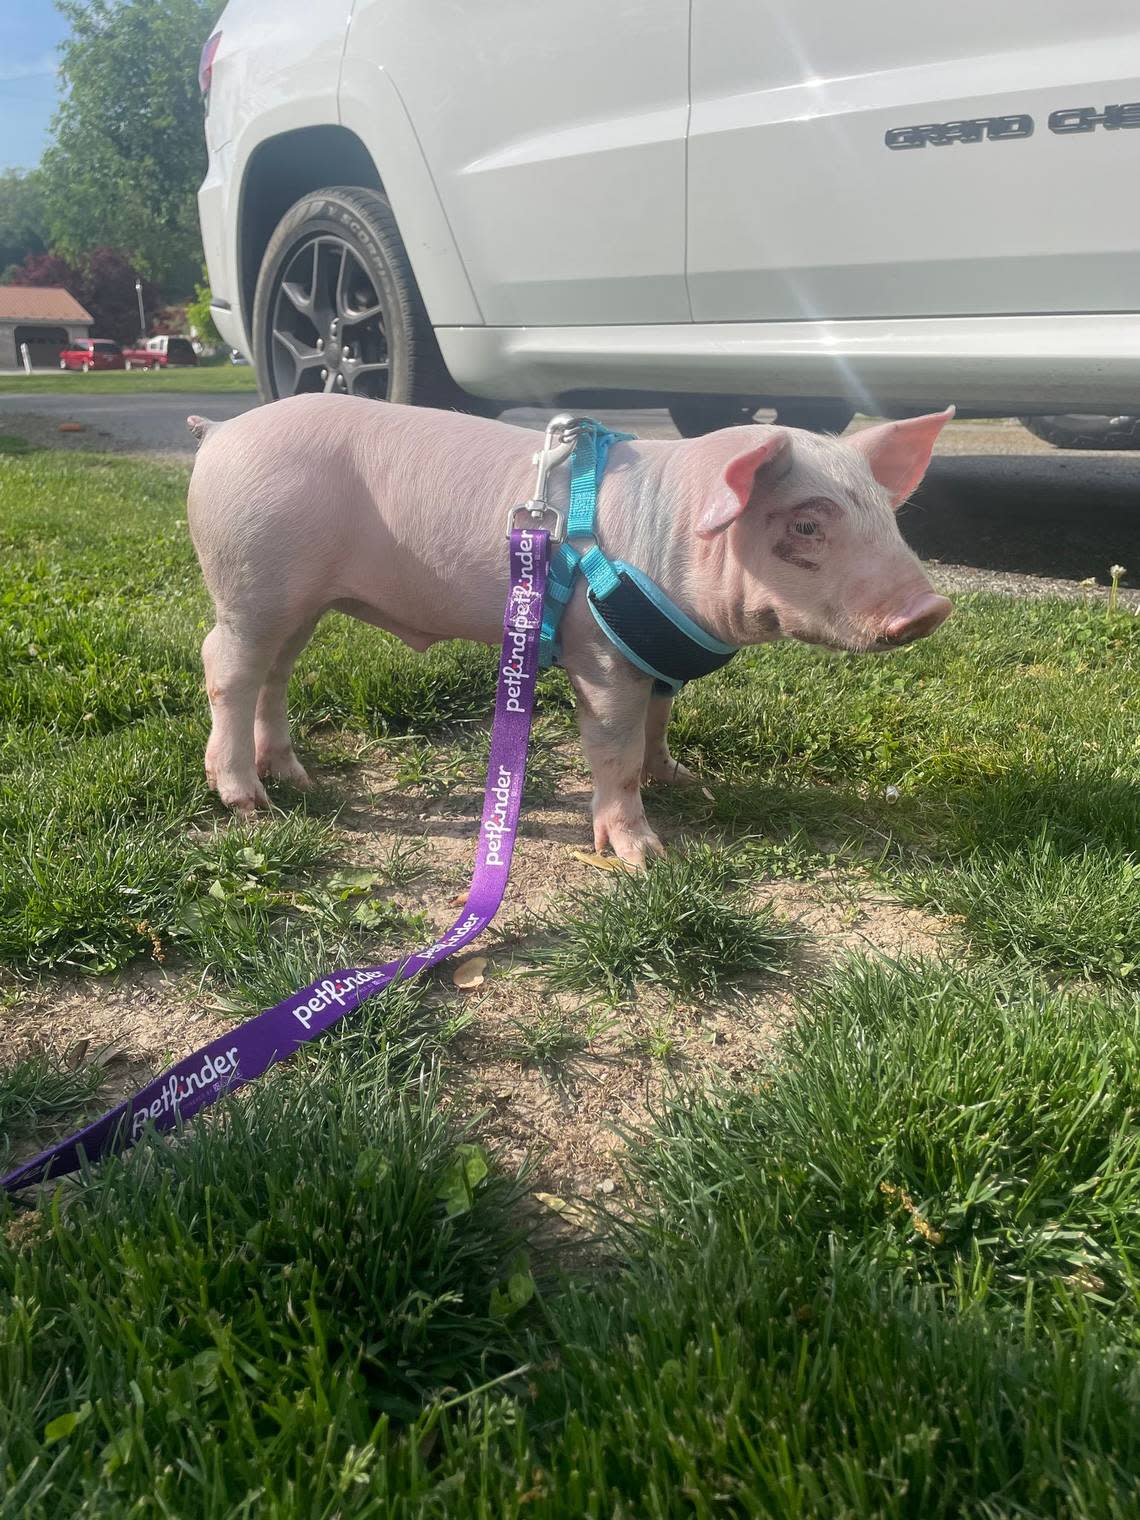 Romeo the Yorkshire pig learning to walk on a leash with his new family